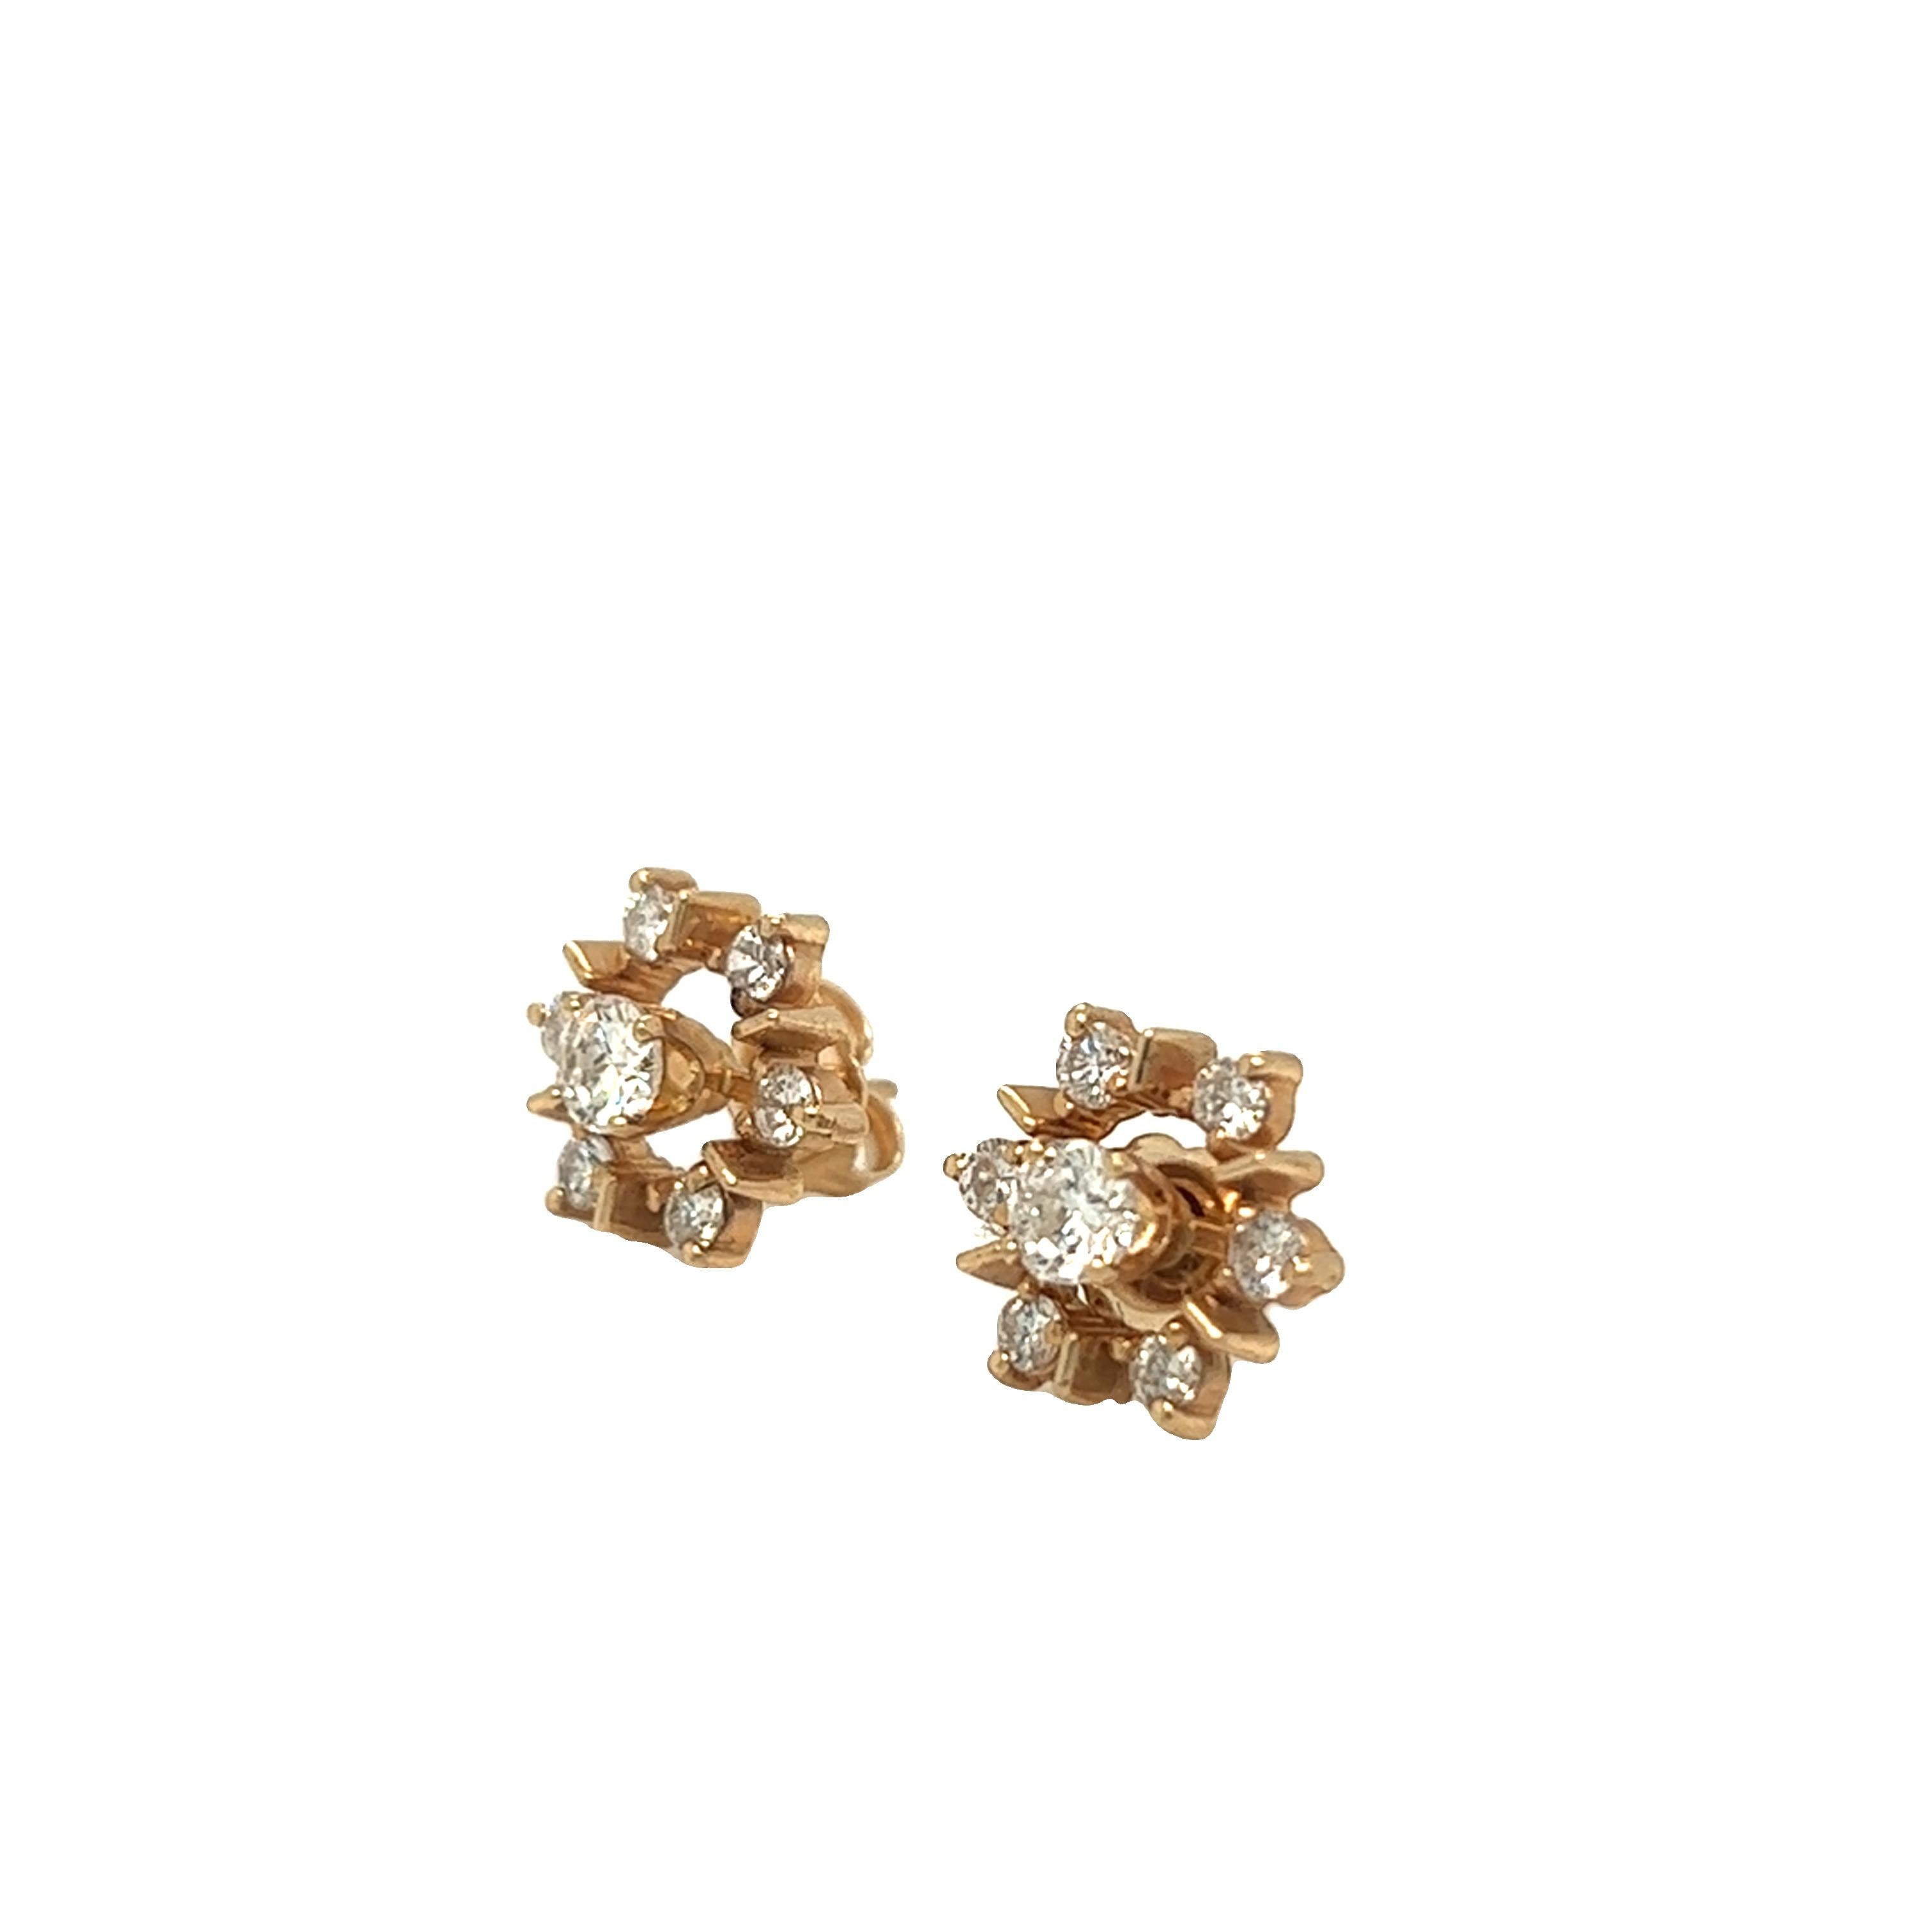 These vintage dainty flower earrings each features a center stone diamond weighing approximately 0.20 carat. Each center stone is gracefully surrounded by six small round cut diamonds weighing about 0.20 carats. The total weight of diamonds is